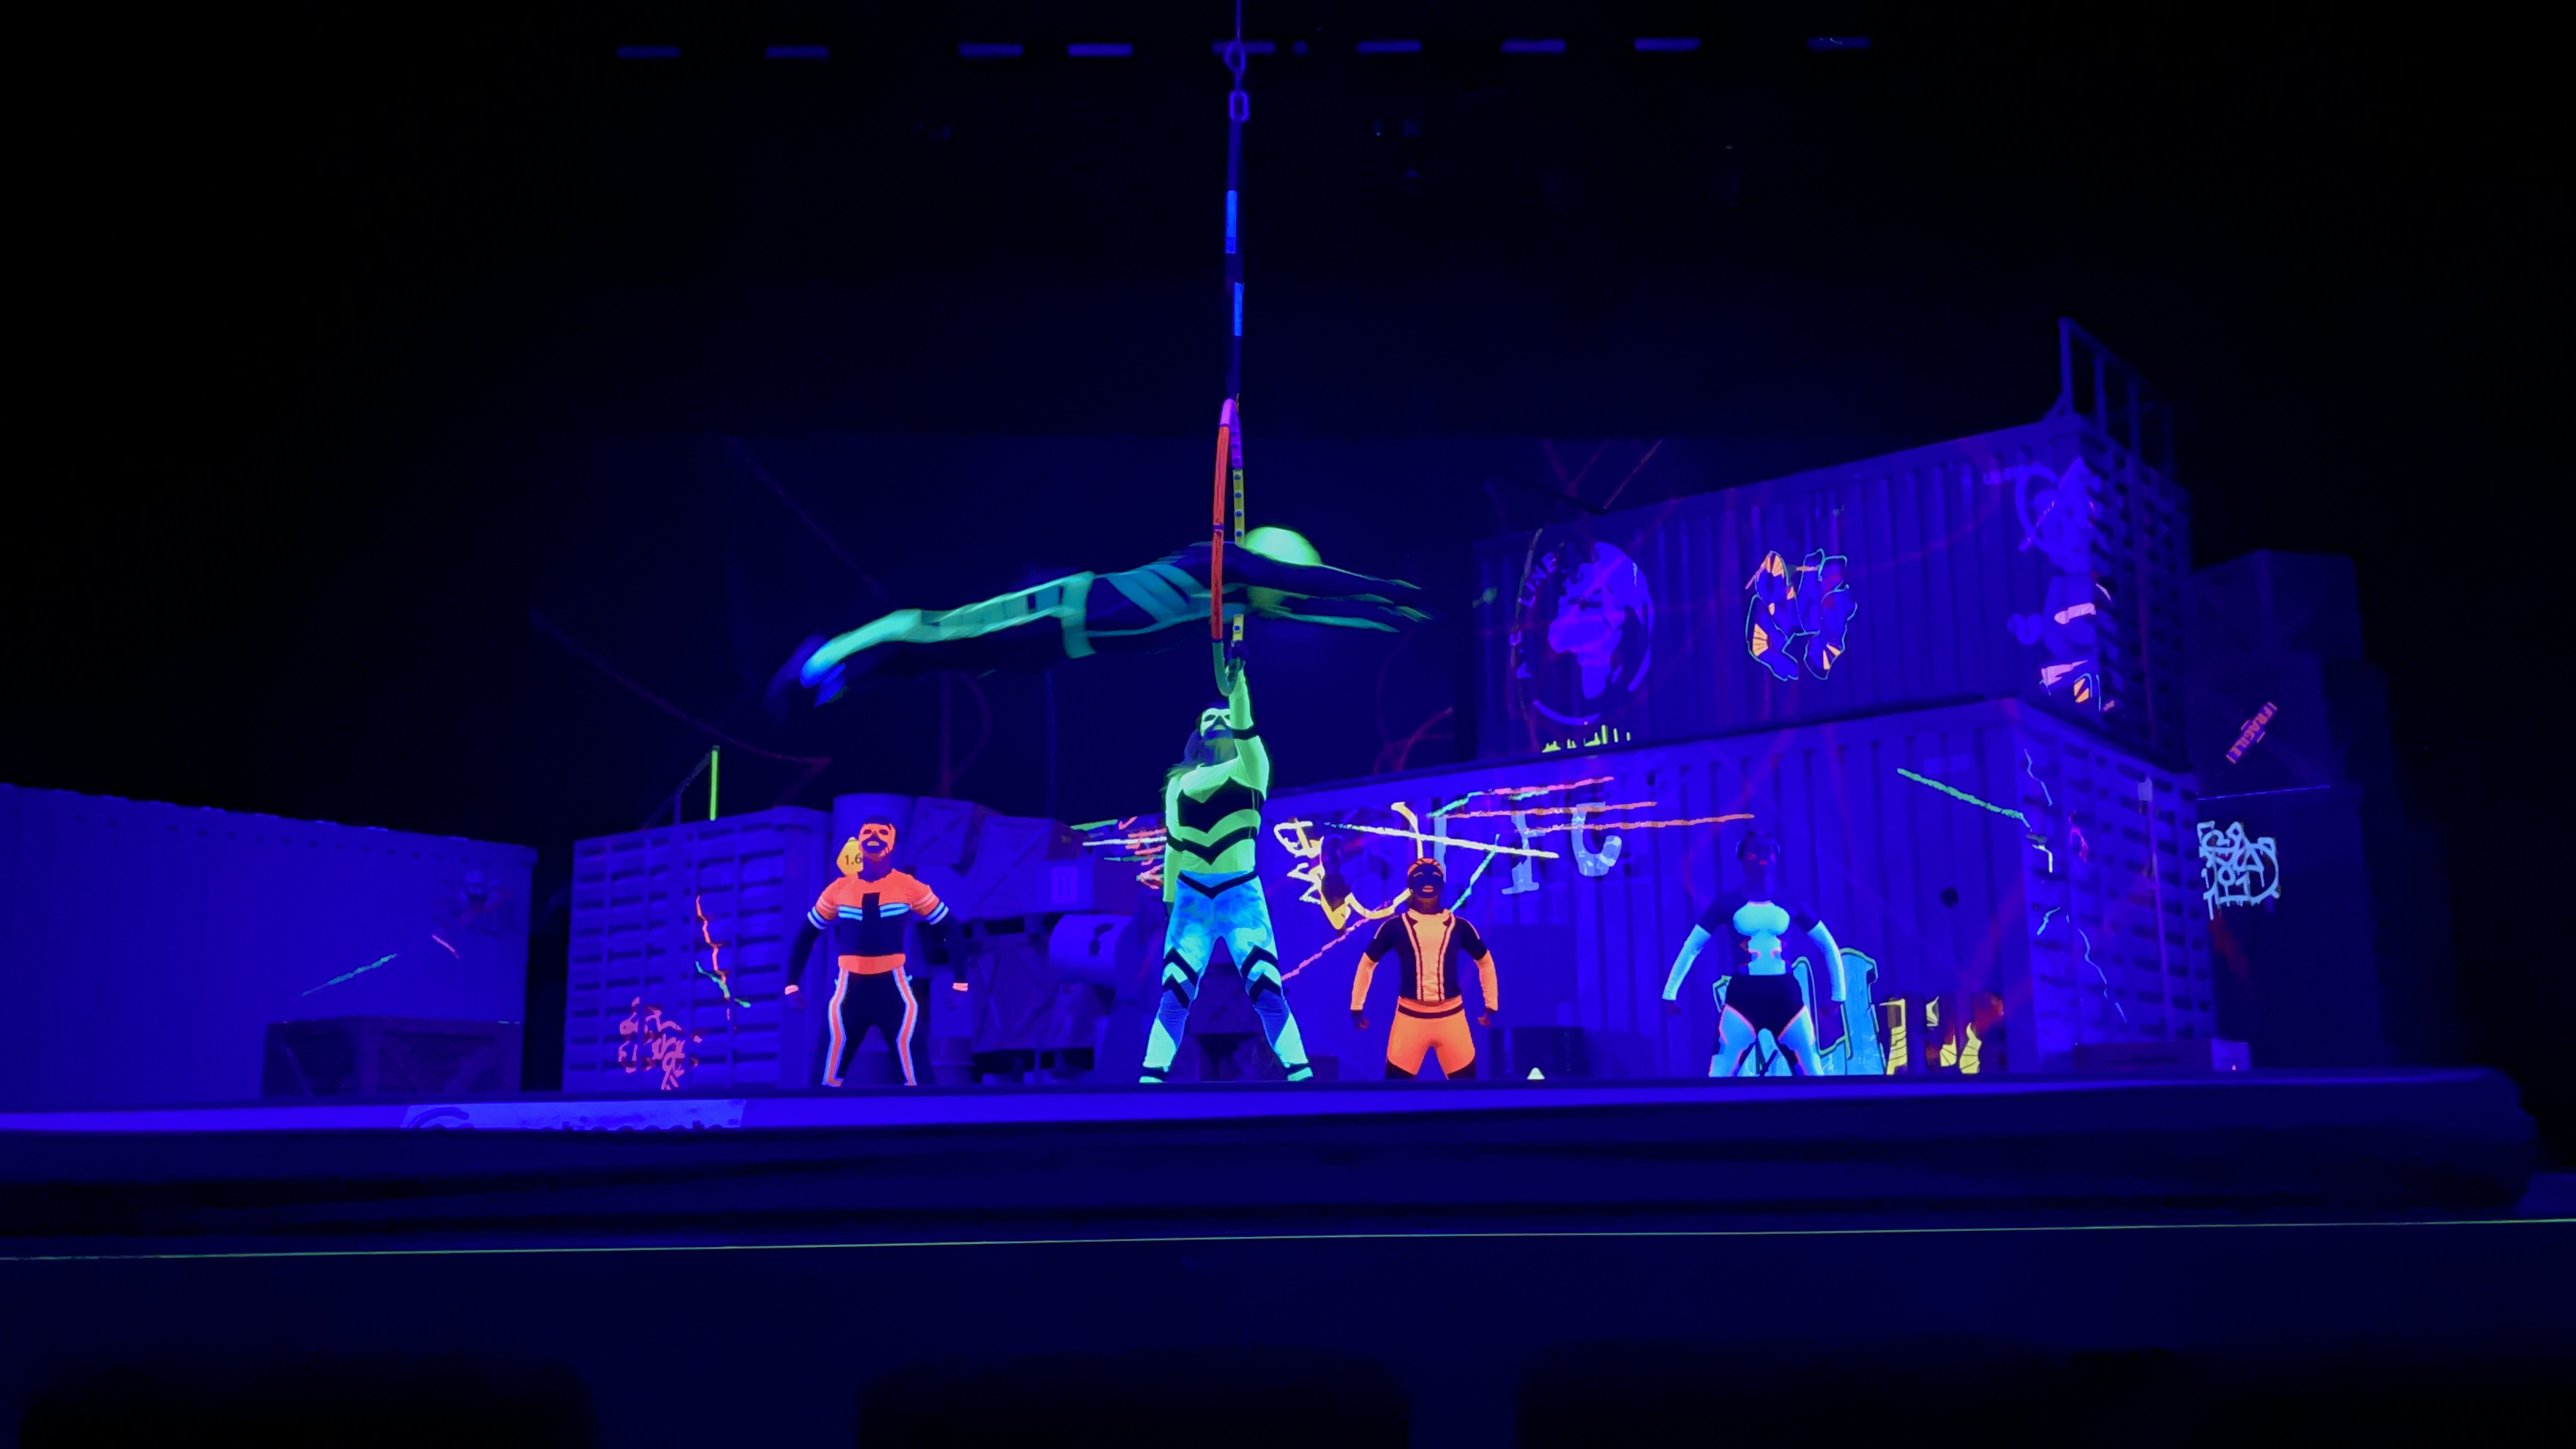 Glow in the dark superheroes themed show